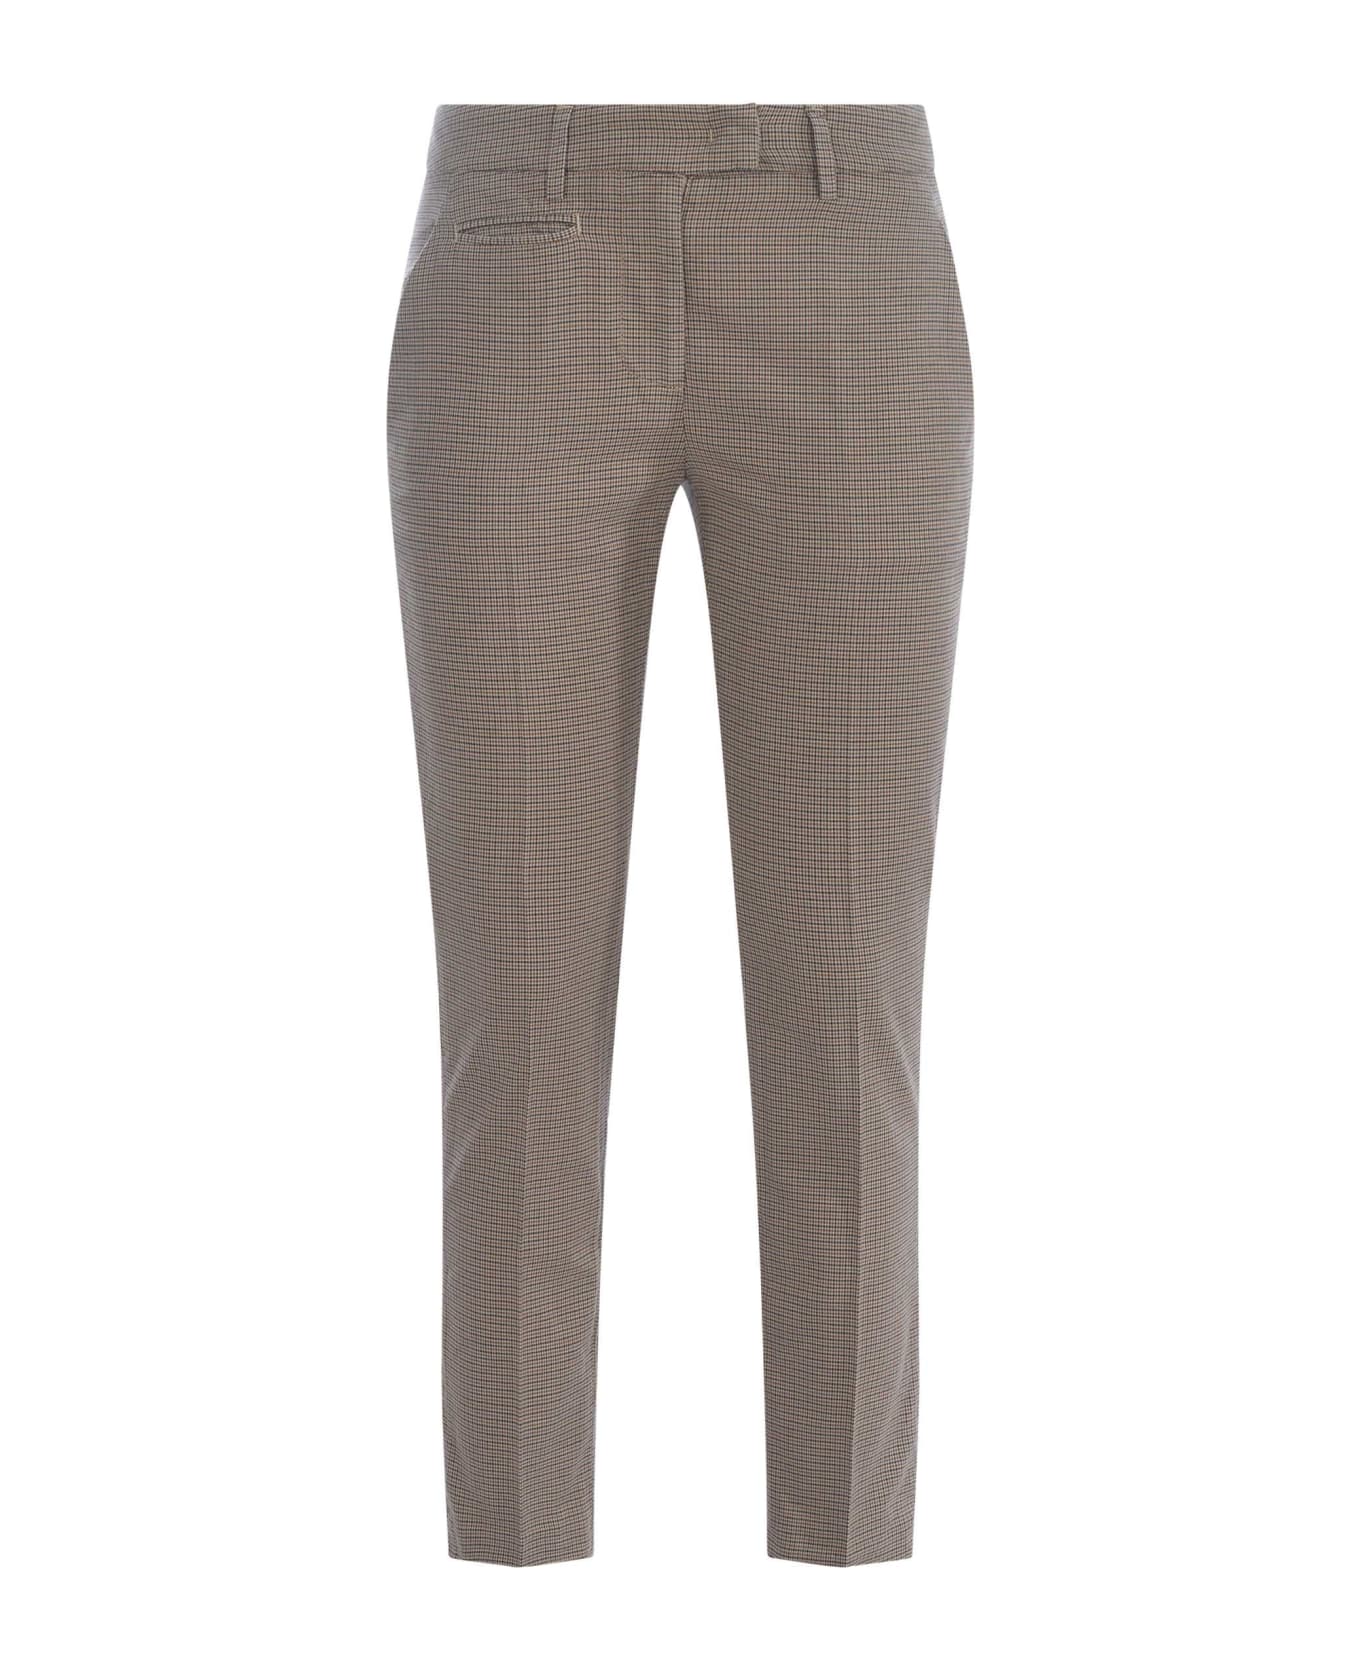 Dondup Trousers Dondup "perfect" In Houndstooth - Beige ボトムス